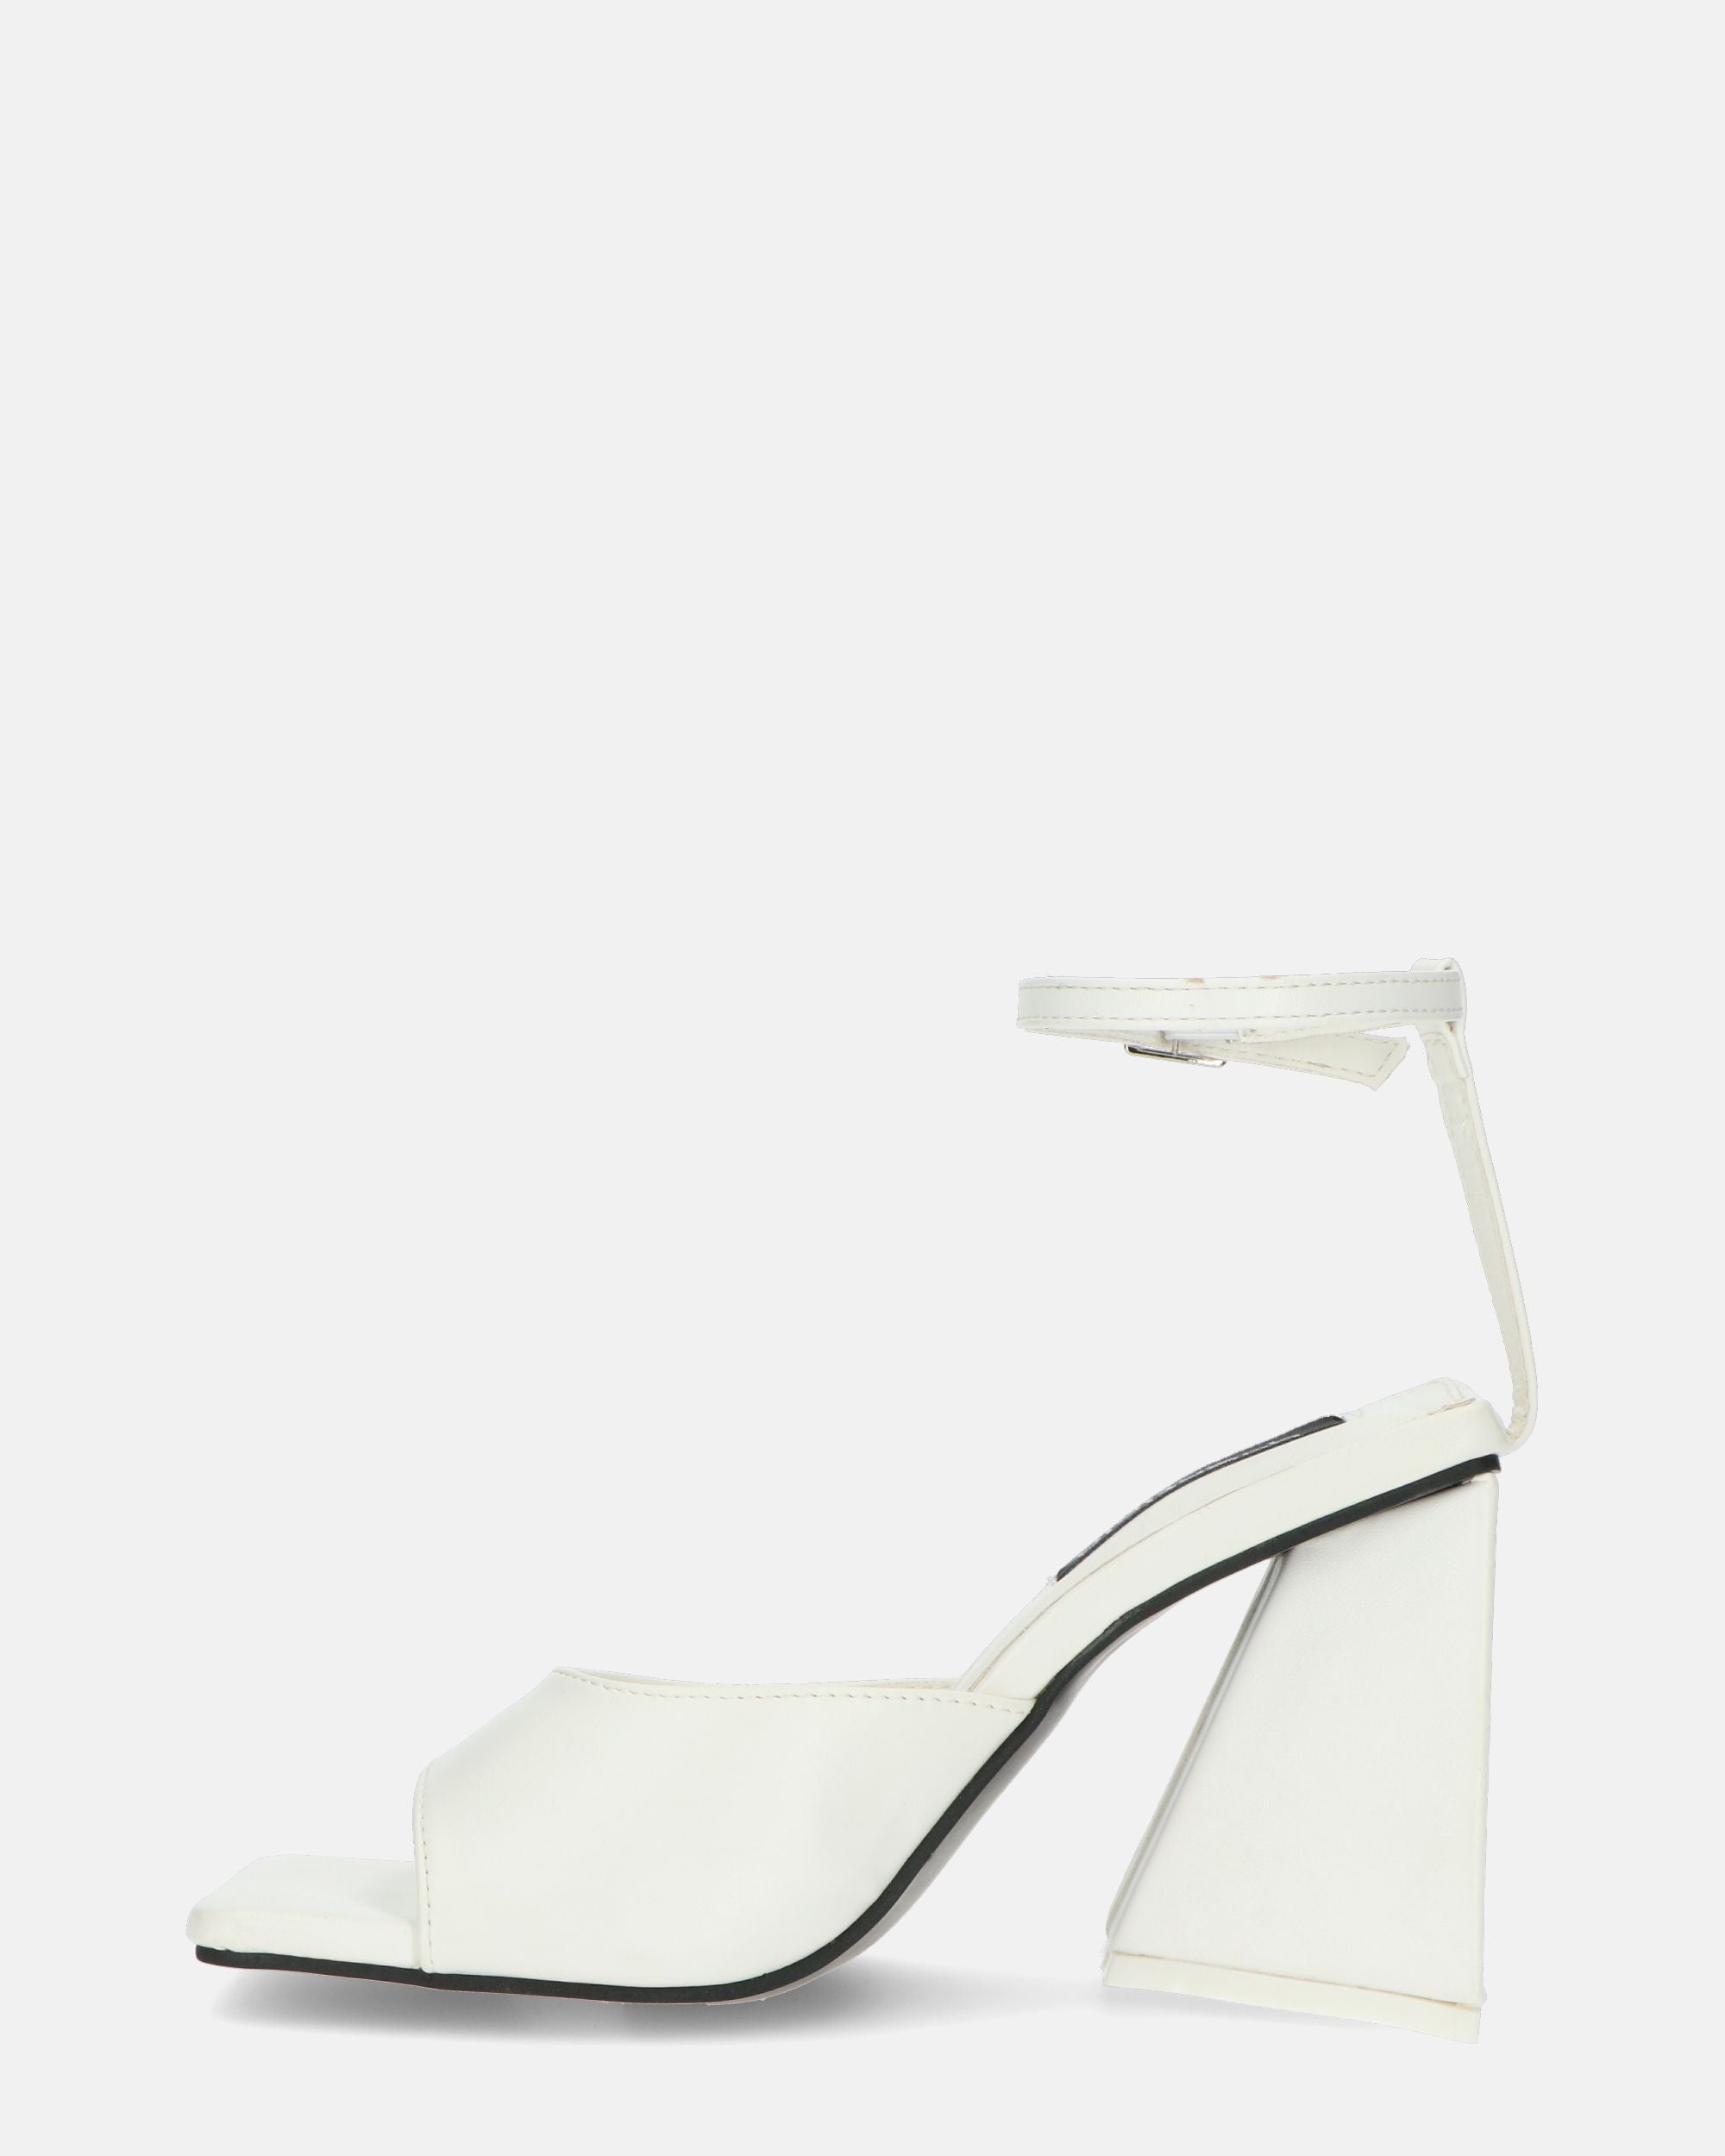 KUBRA - sandals with strap in white PU